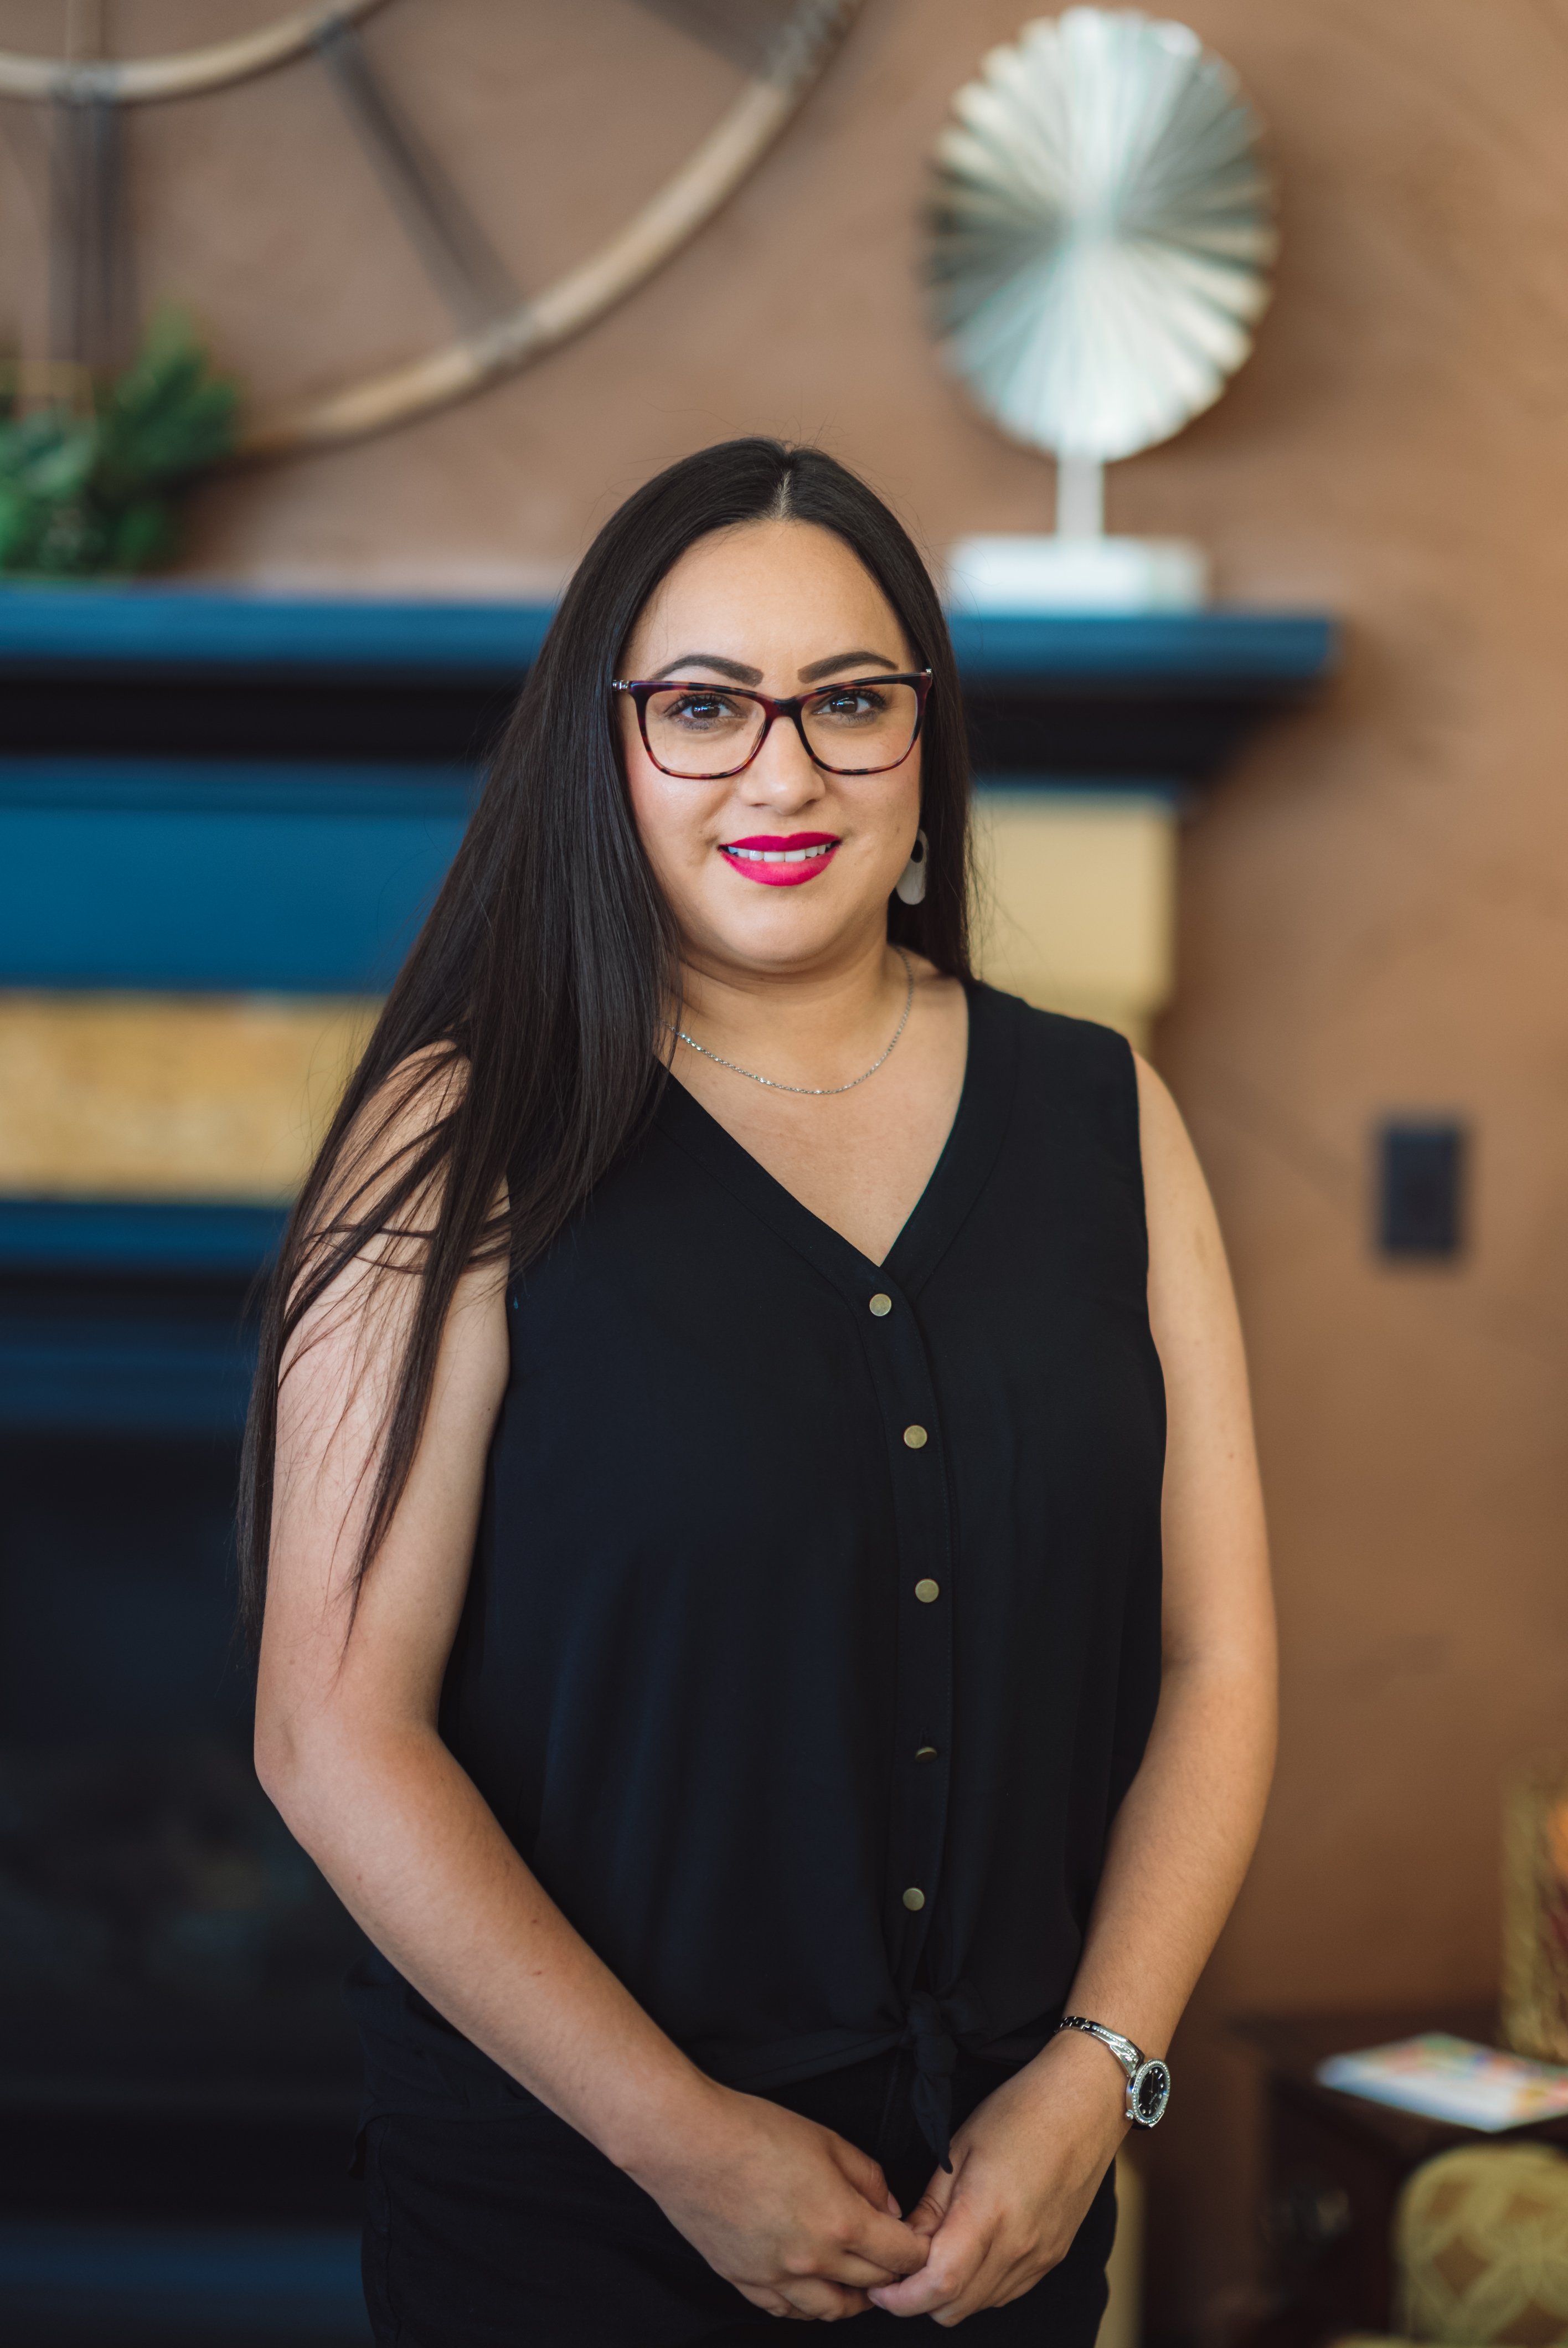 Liz is one of our full-time sales associates with 8 years’ experience in the flooring industry, customers love to work with because of her attention to detail. Customer service is her top priority, if you’re envisioning certain products, she will work wit